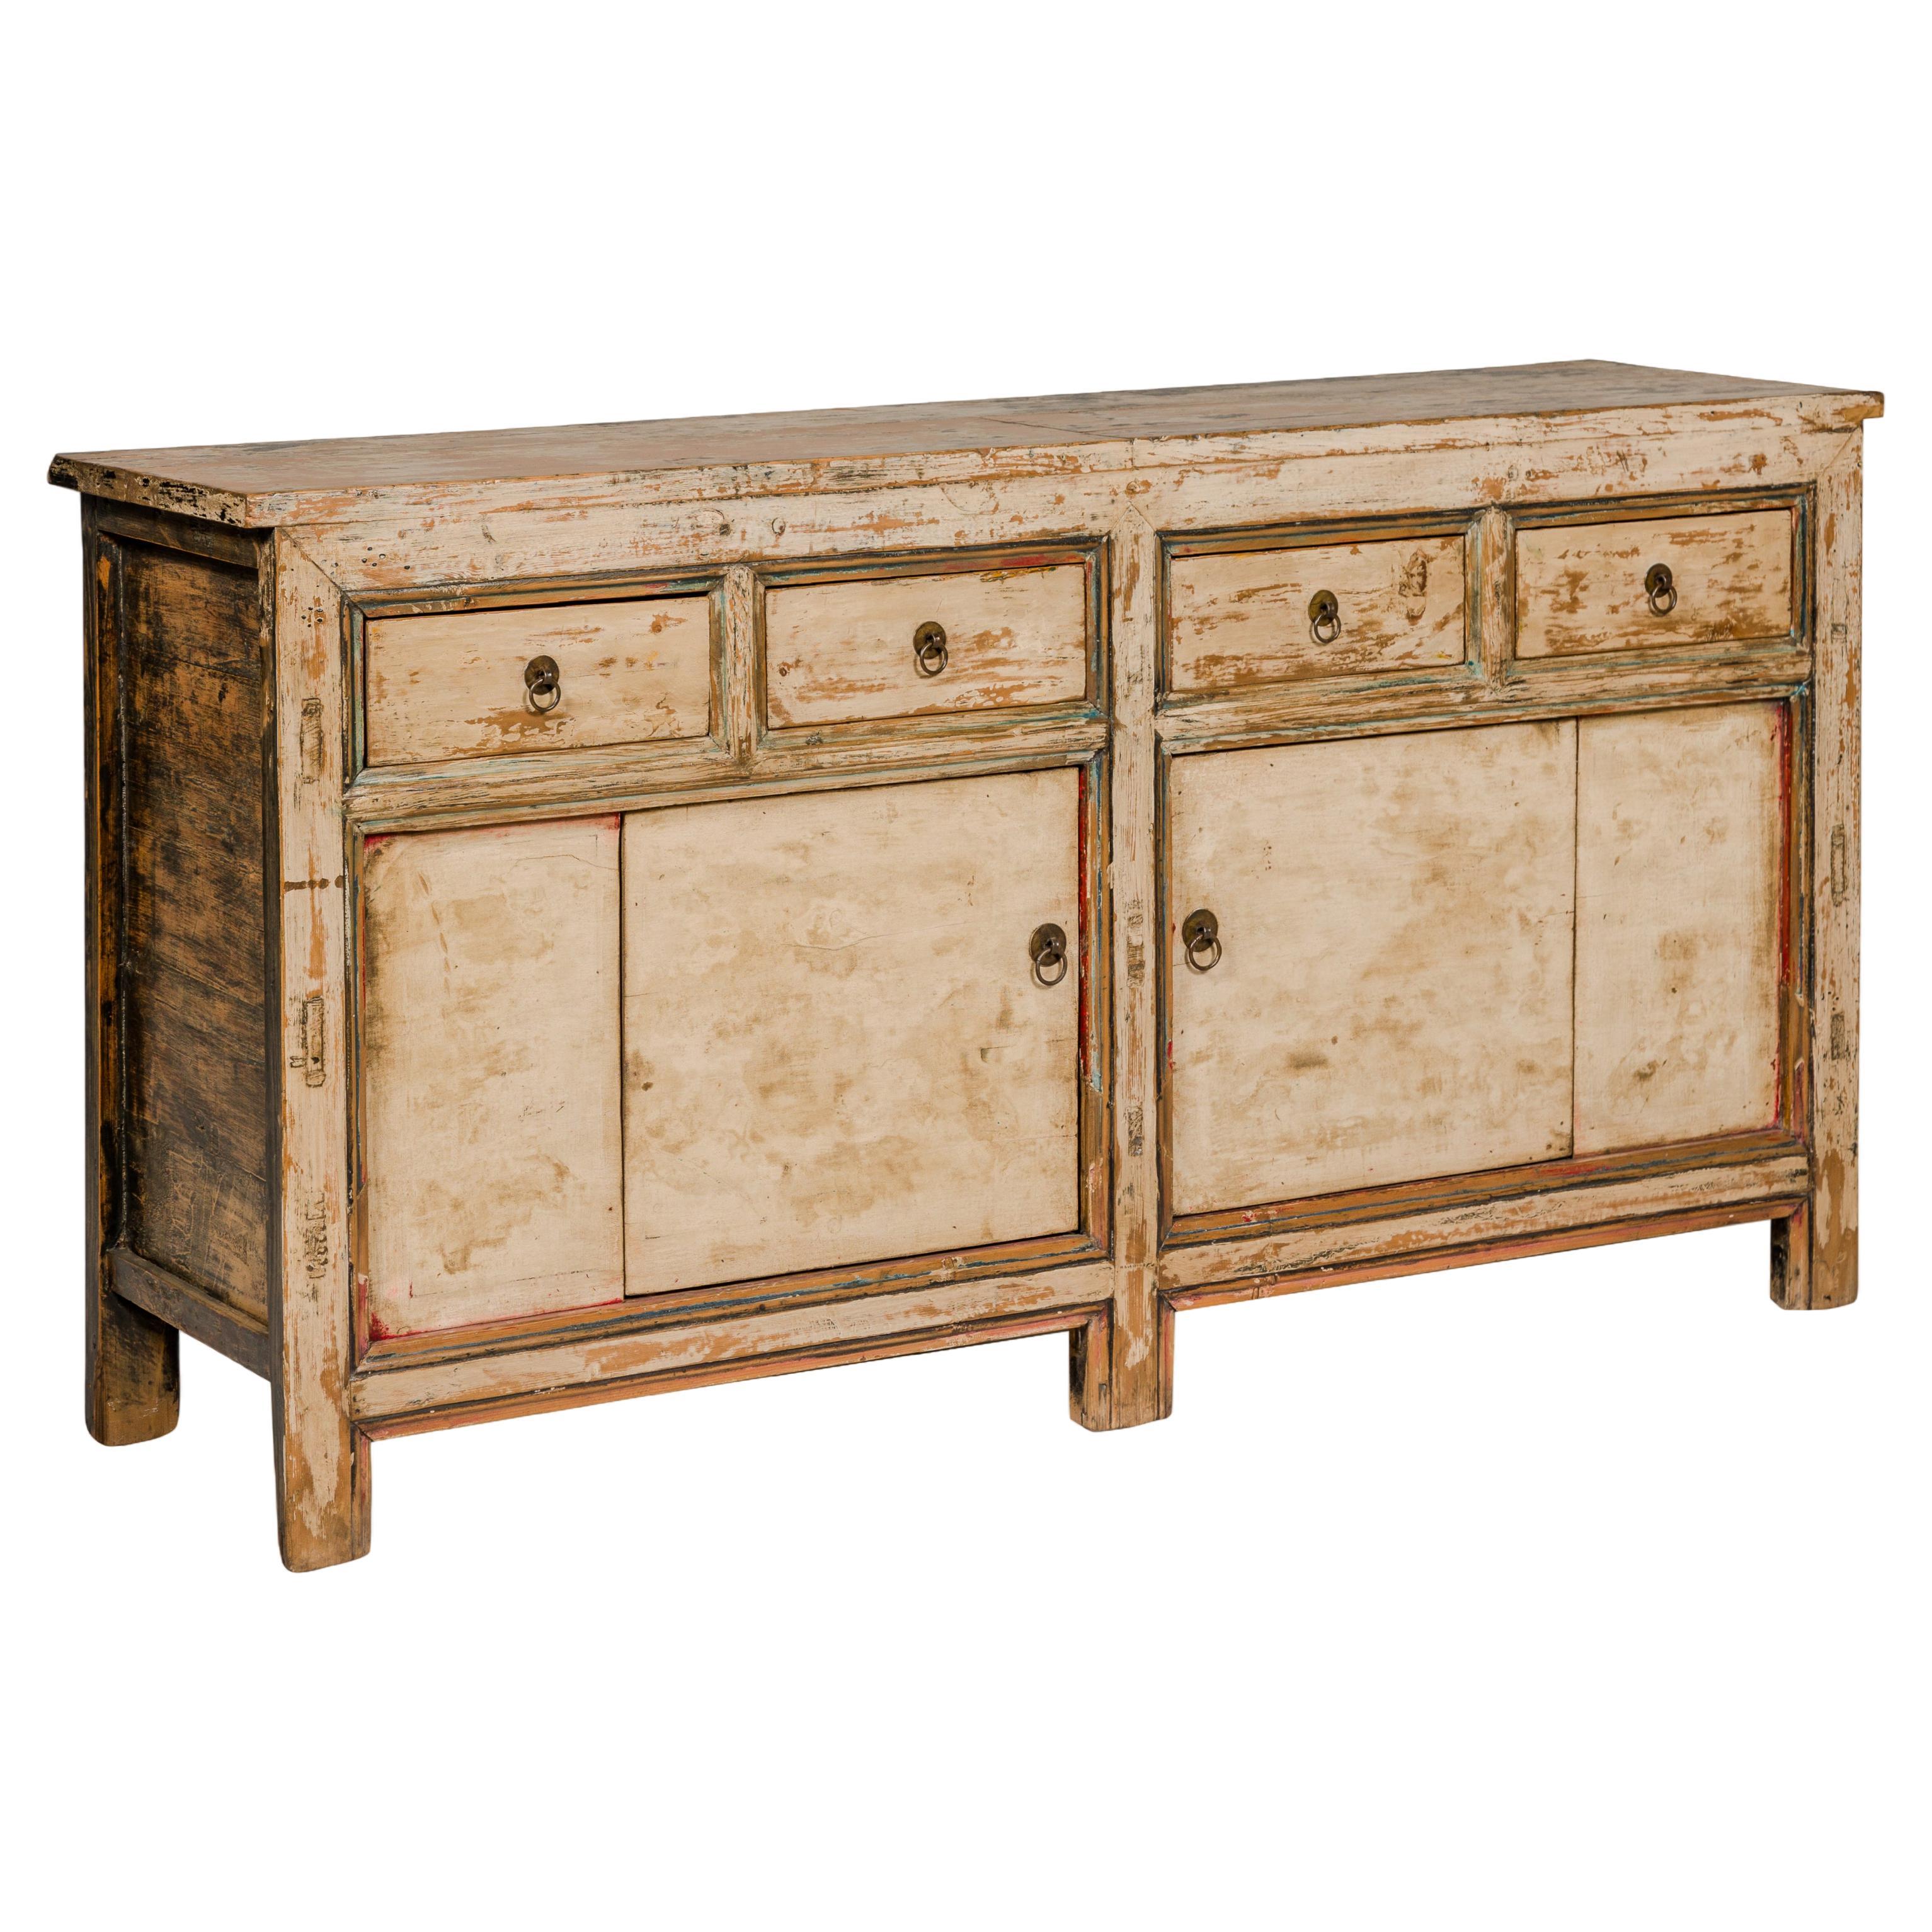 Painted Elm Rustic Sideboard with Two Doors, Four Drawers and Distressed Finish For Sale